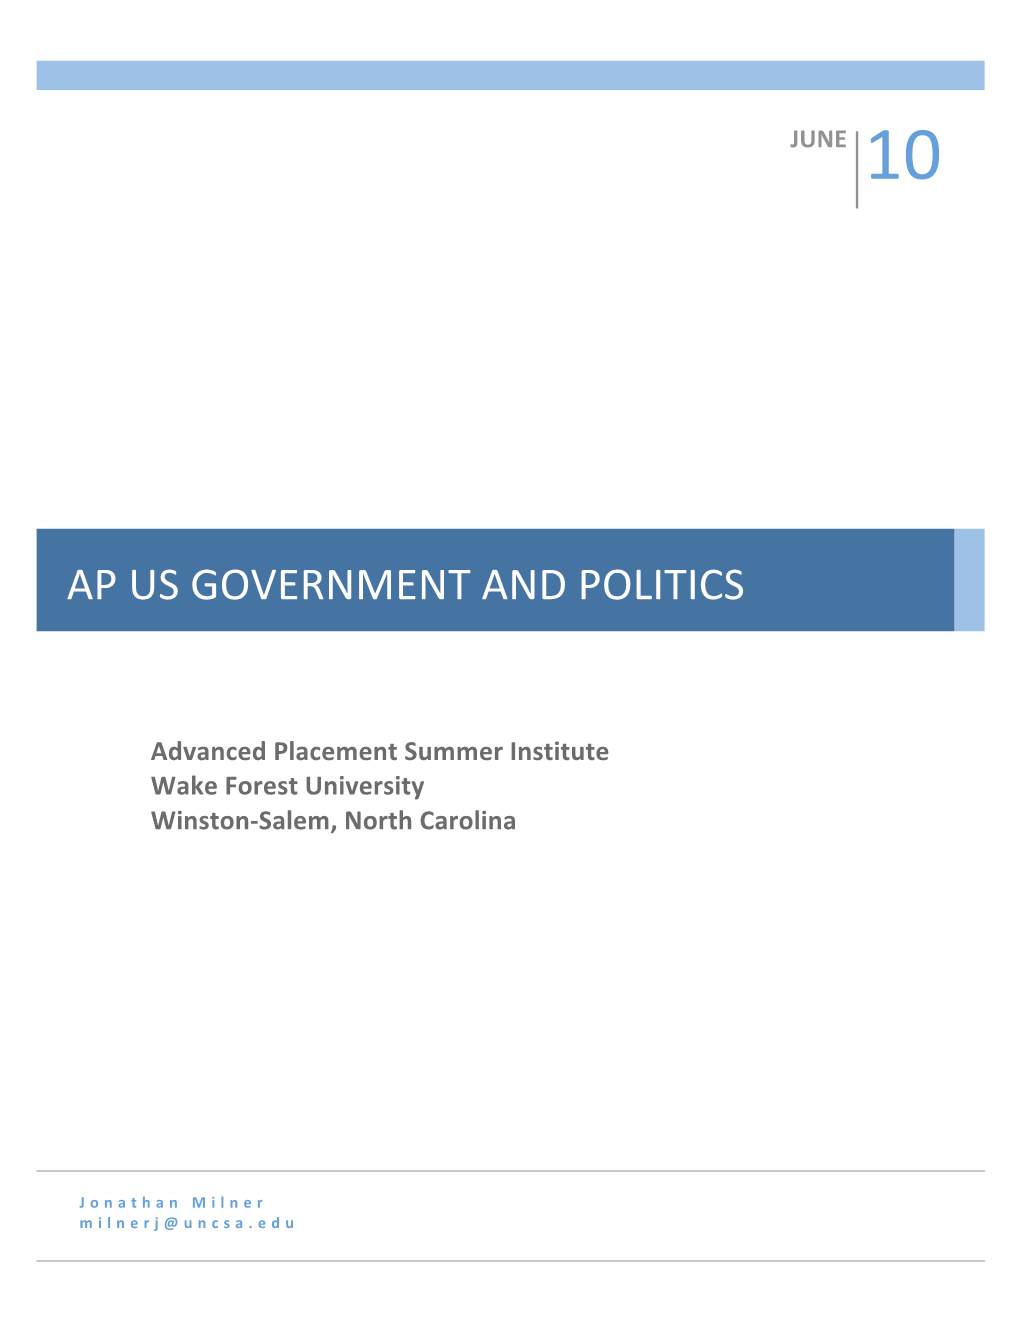 AP US Government and Politics Curriculum and Exam Structure